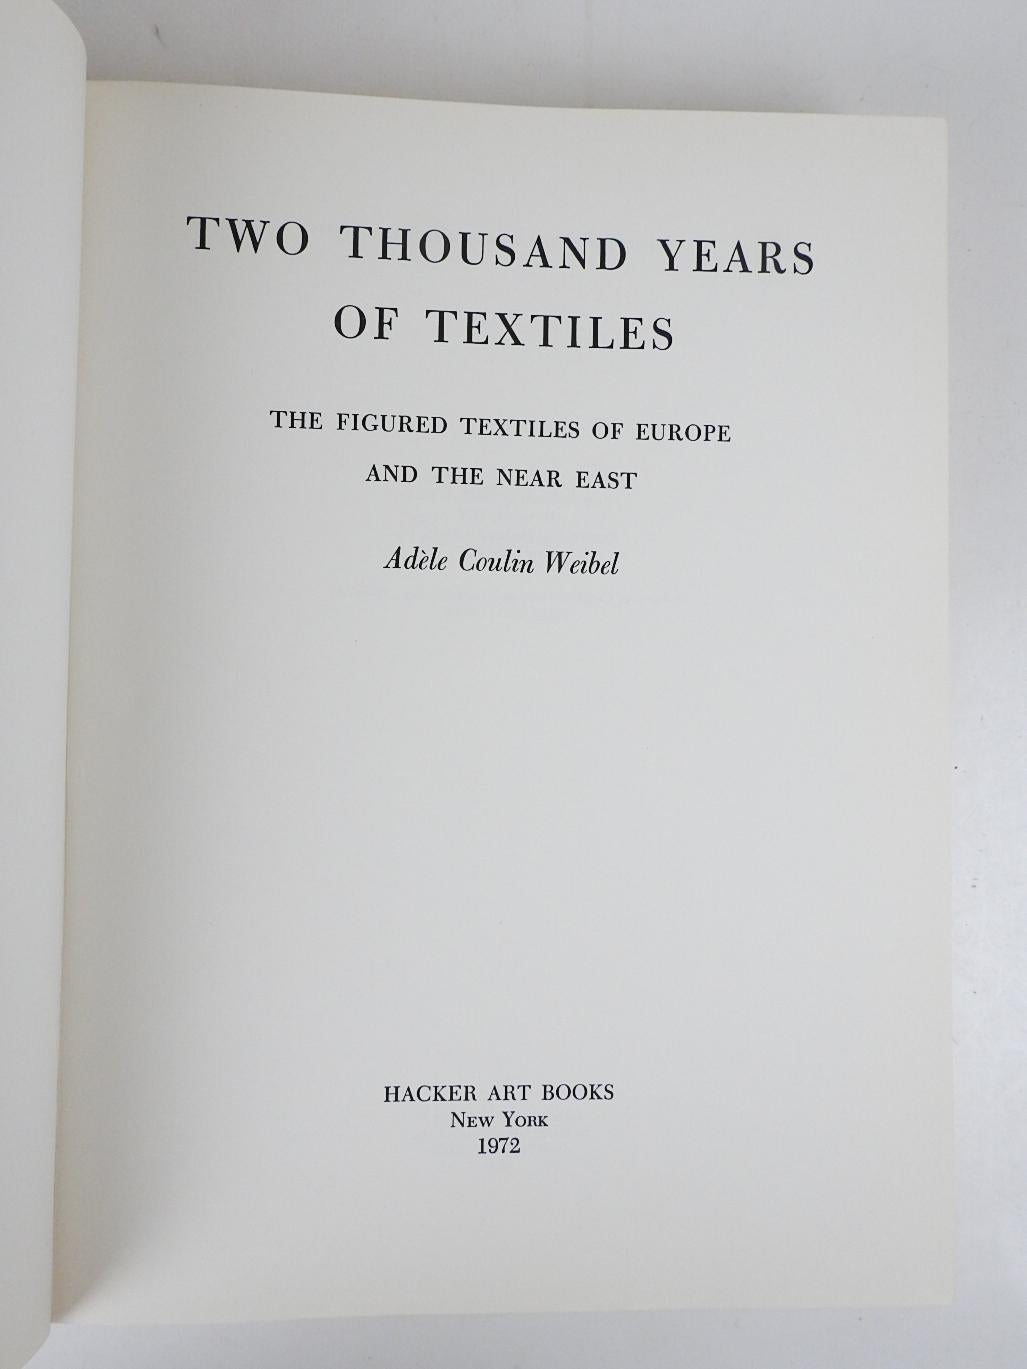 Two Thousand Years of Textiles;: The figured textiles of Europe and the Near East by Adele C. Weibel.  Published by Hacker Art Books, New York, 1972.  Linen cloth binding, many illustrations, minor shelf wear.